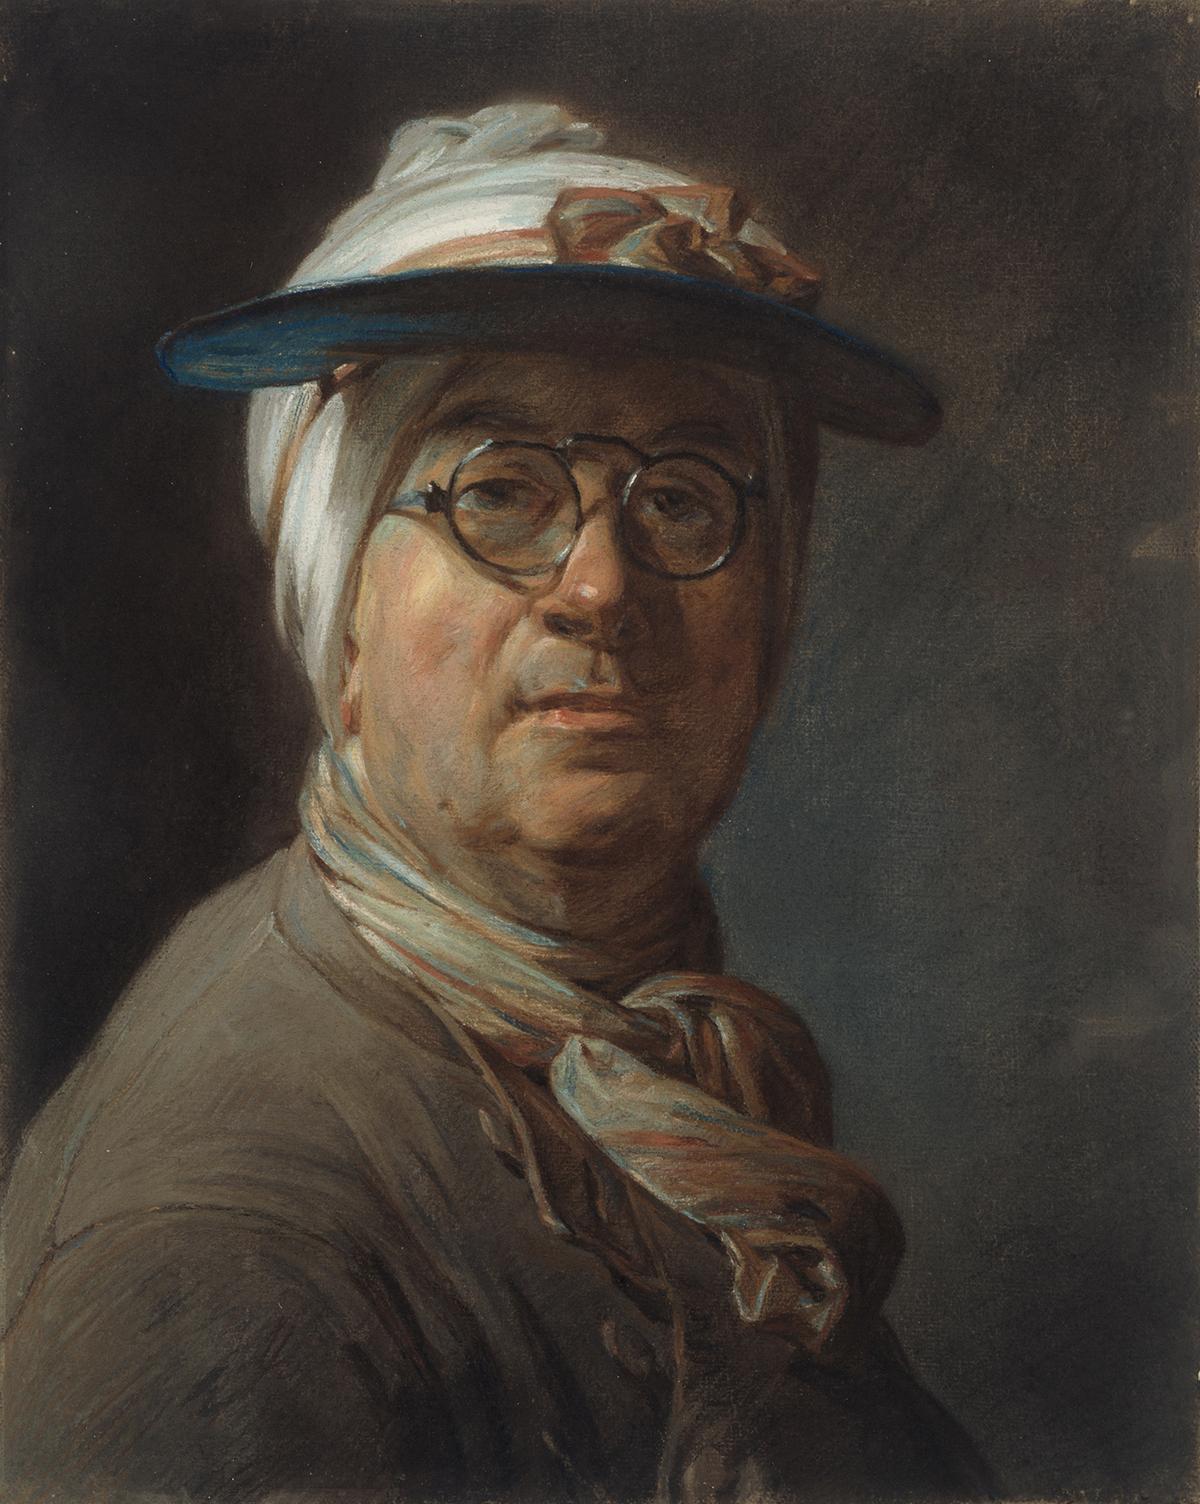 Self-Portrait With a Visor," 1776, by Jean-Baptiste-Siméon Chardin. Pastel on blue laid paper, mounted on canvas; 18 inches by 14 3/4 inches. Art Institute of Chicago. (Public Domain)